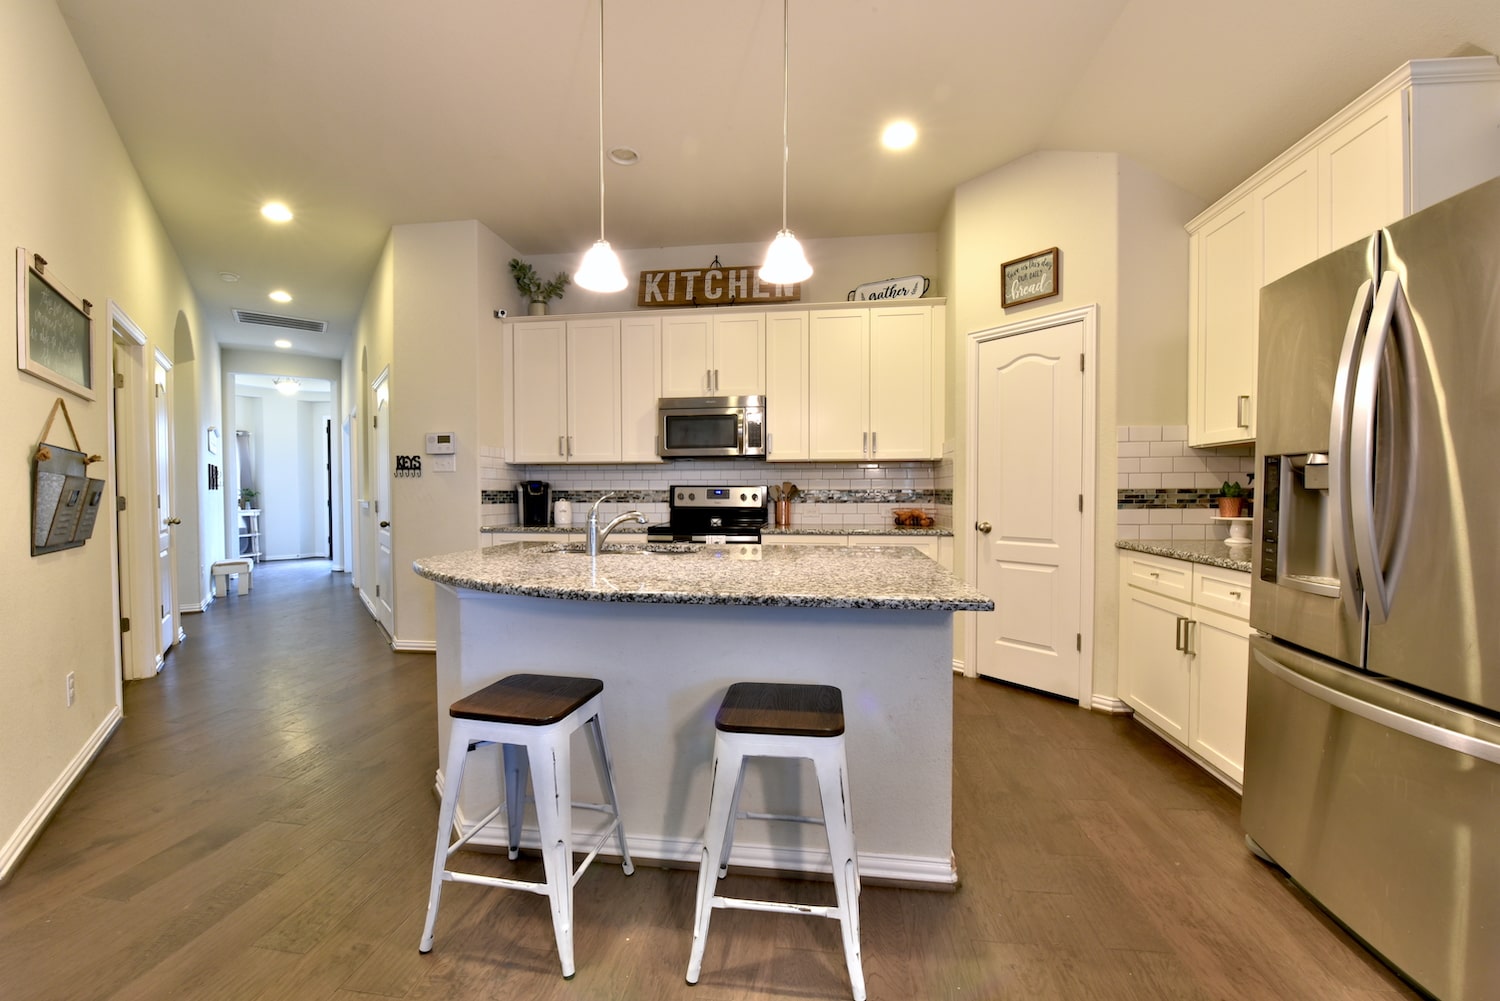 image of open kitchen for real estate photography austin